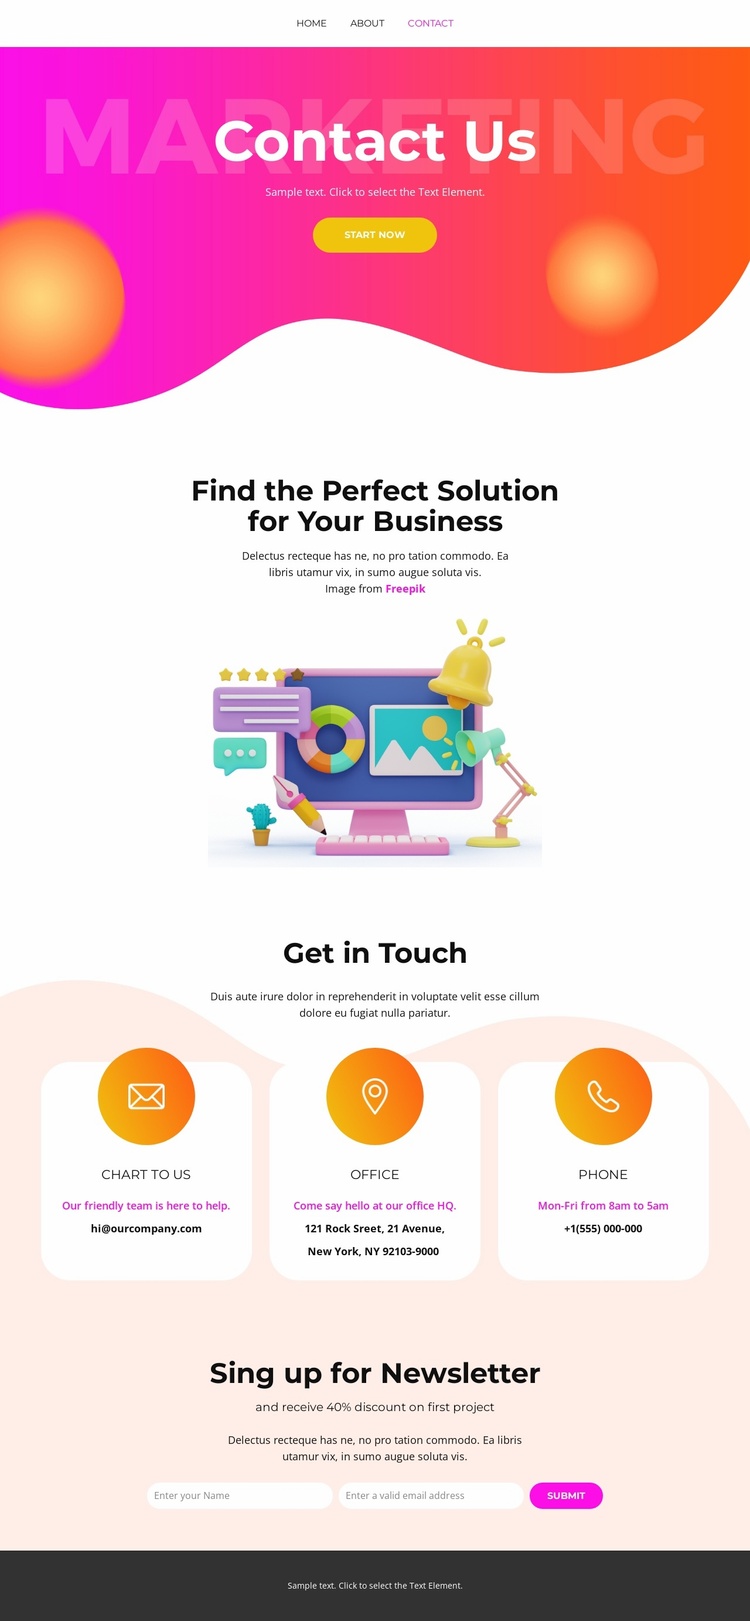 Pay for Qualified Traffic eCommerce Template